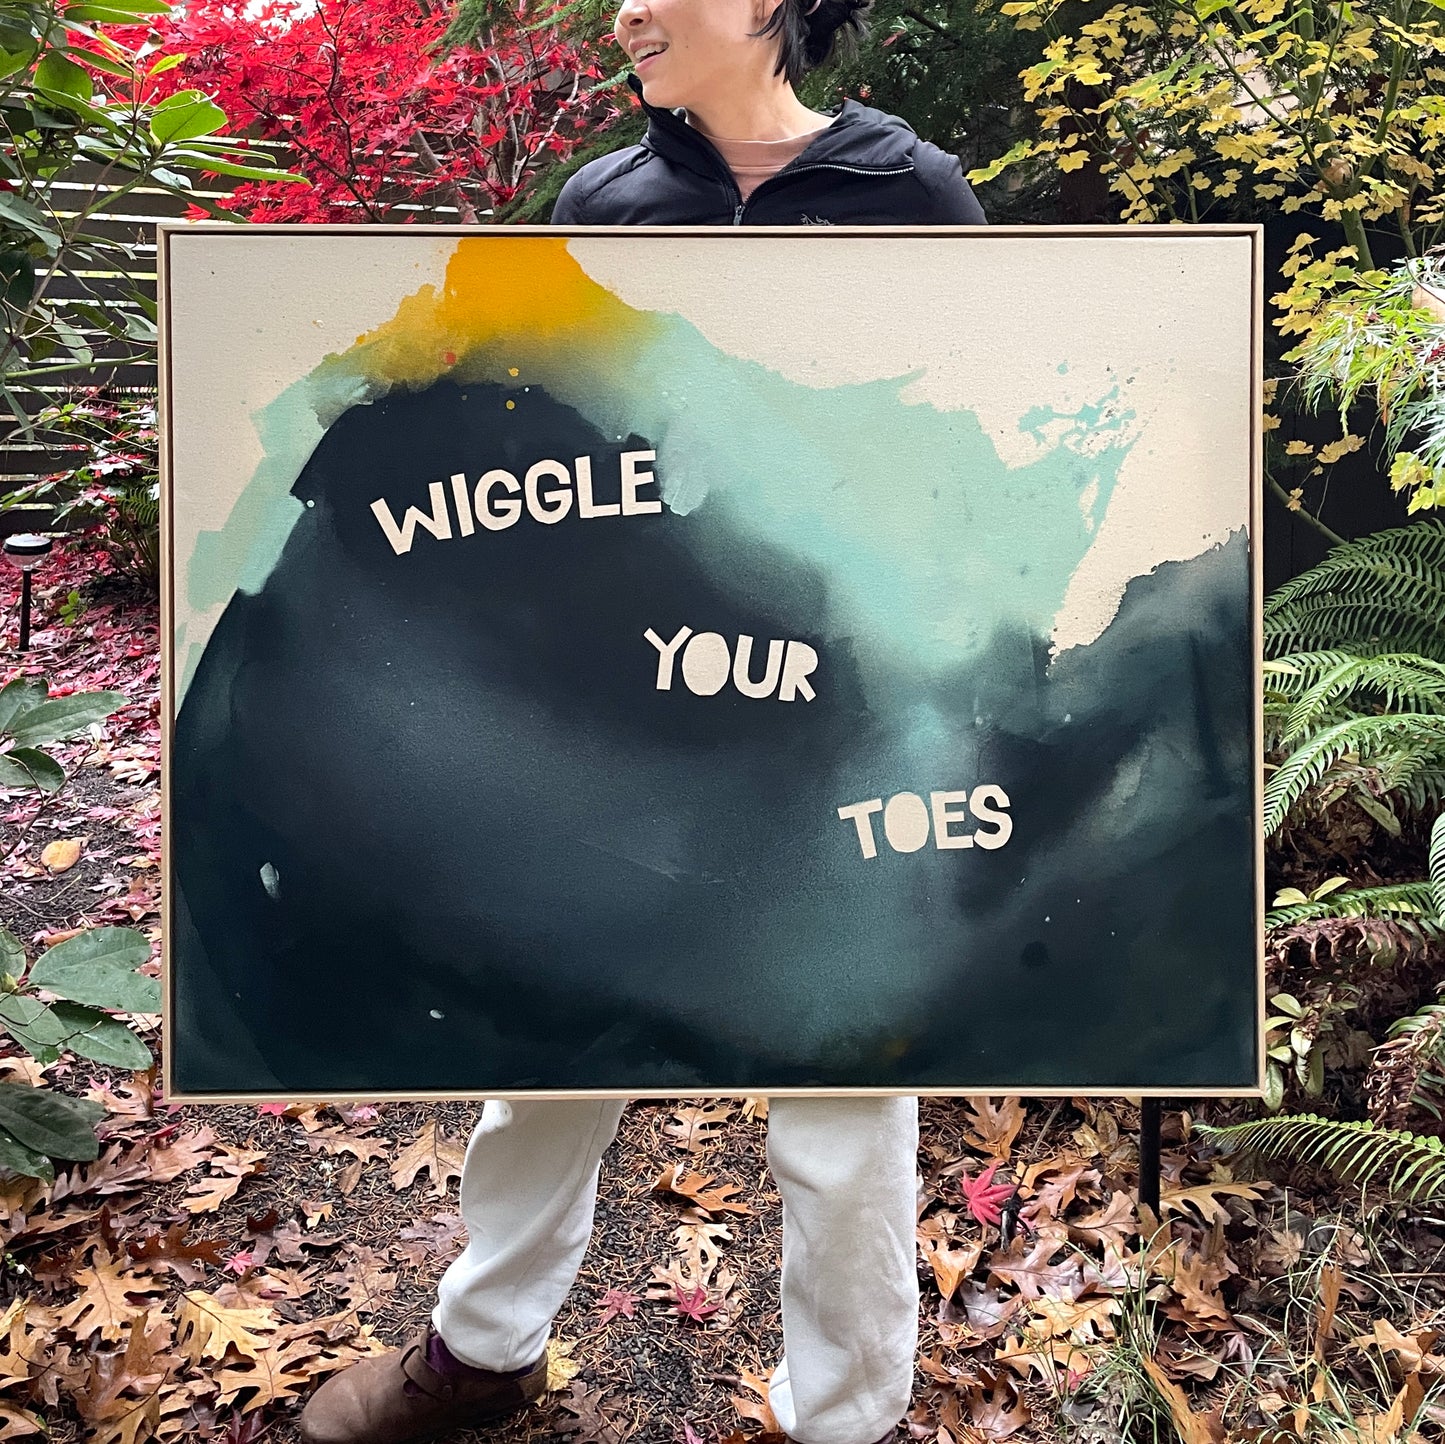 WIGGLE YOUR TOES